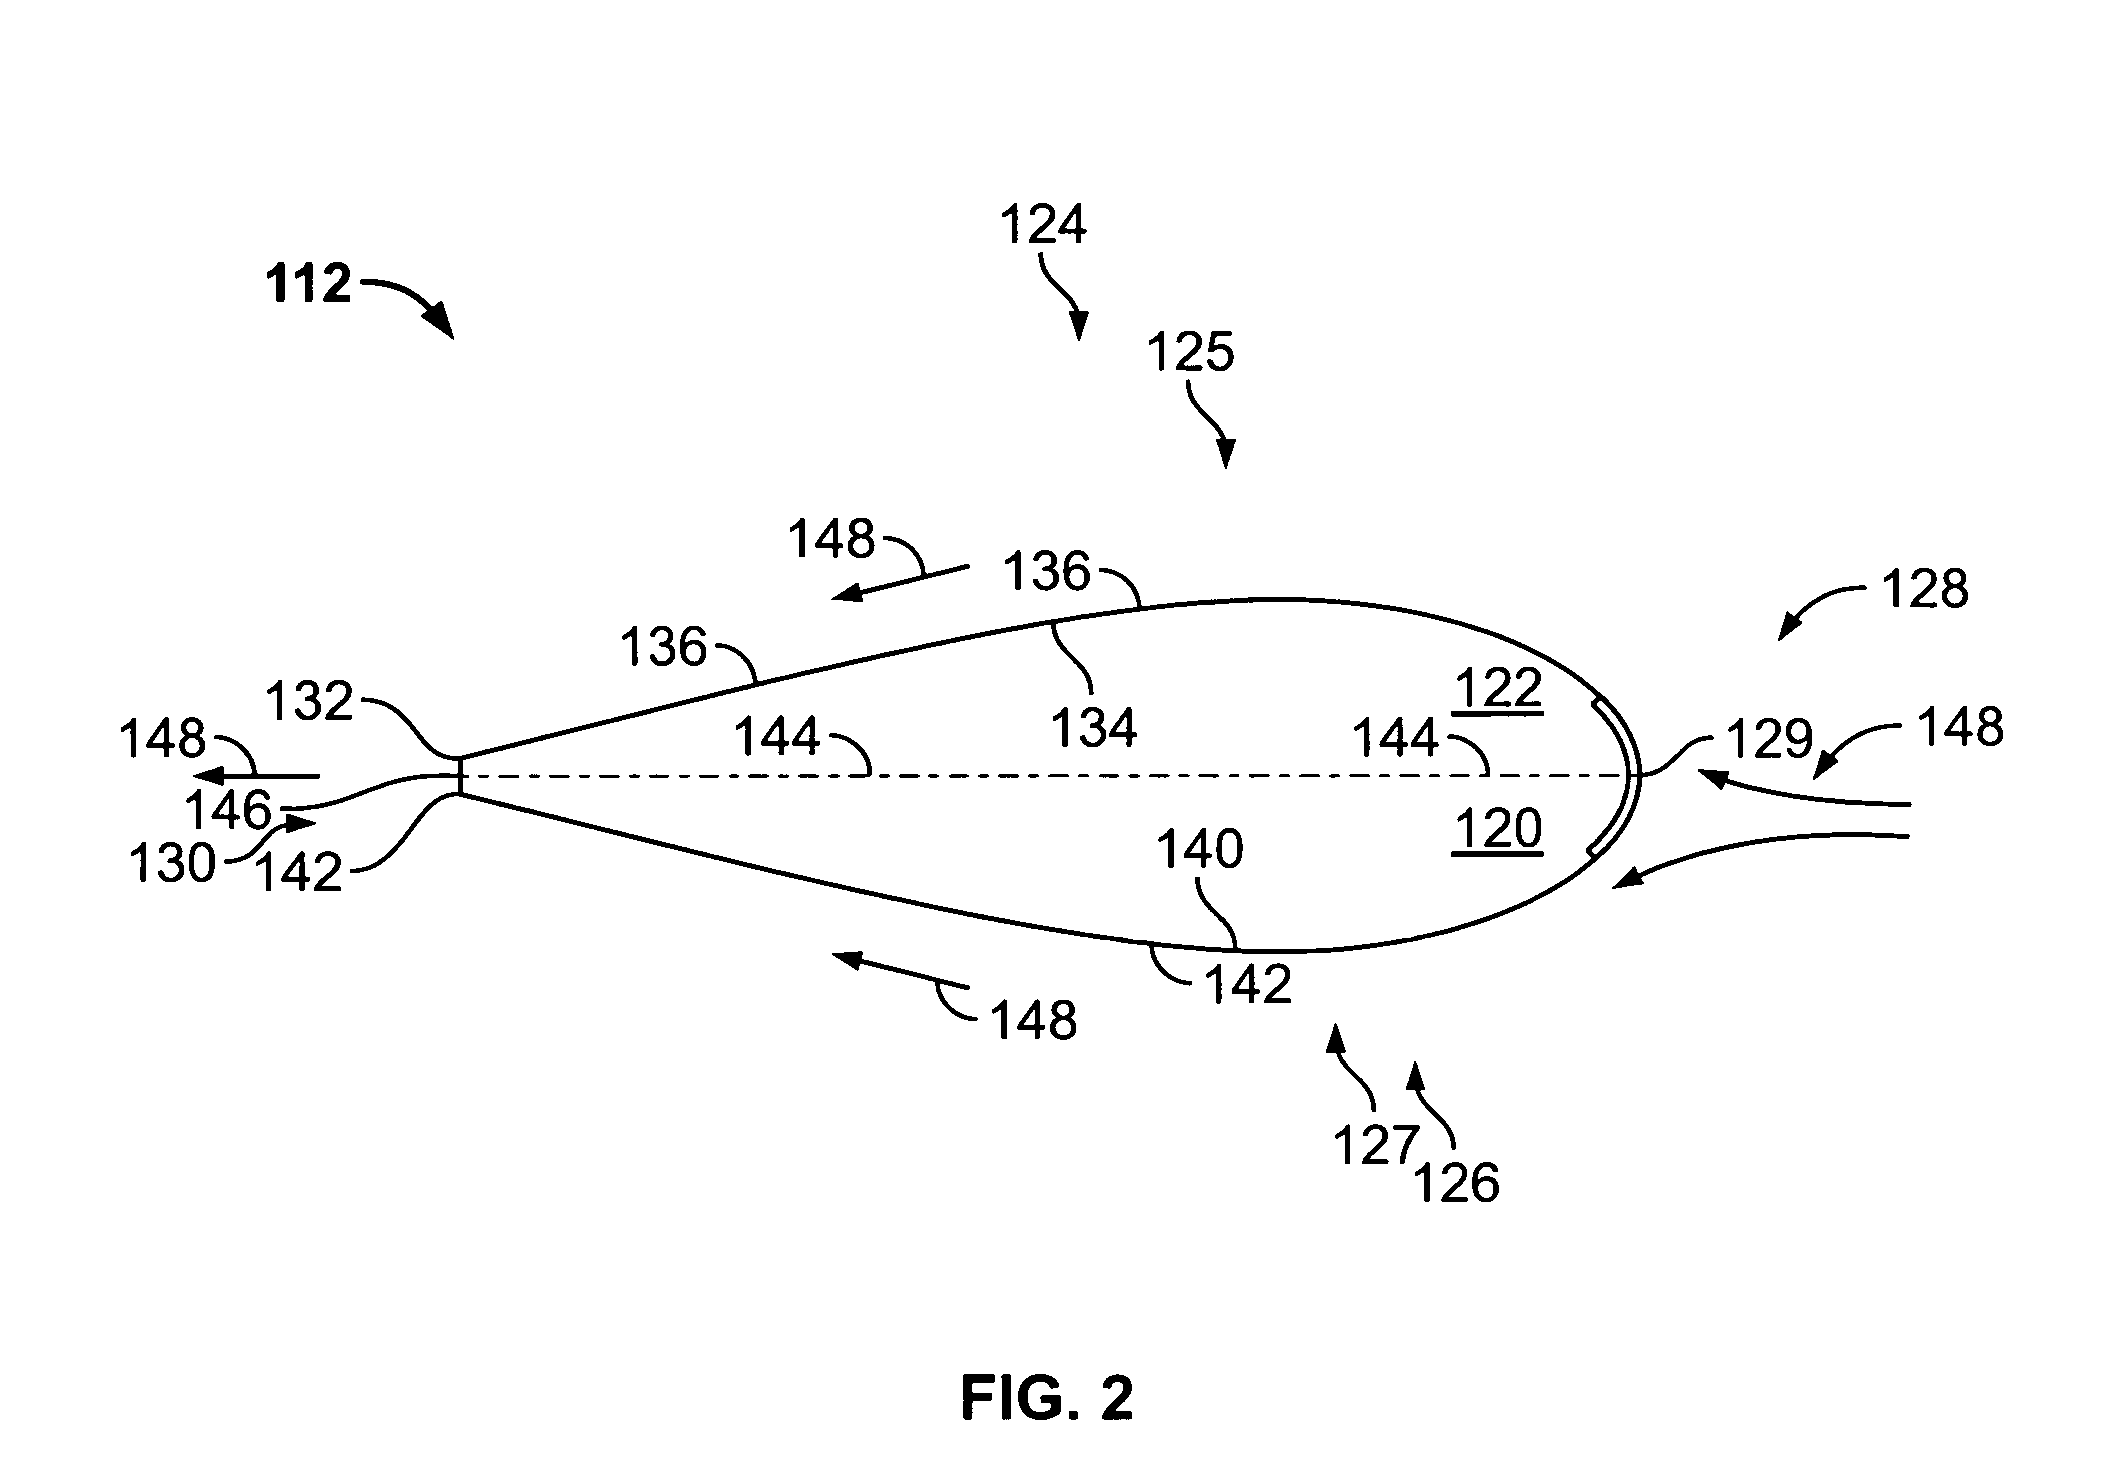 Method and apparatus for fabricating wind turbine components